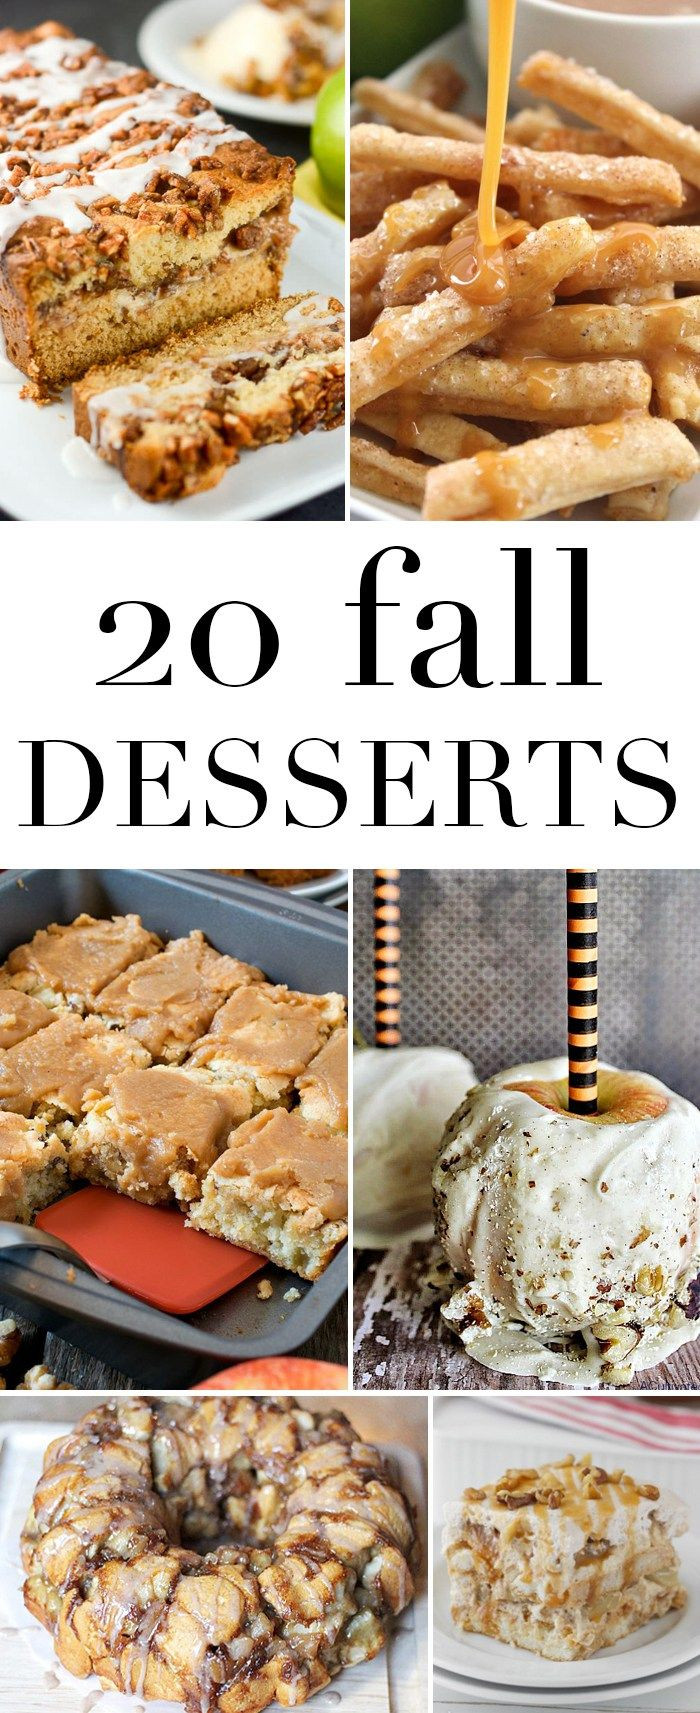 Fall Desserts Recipes
 92 best images about Seasonal Fall on Pinterest